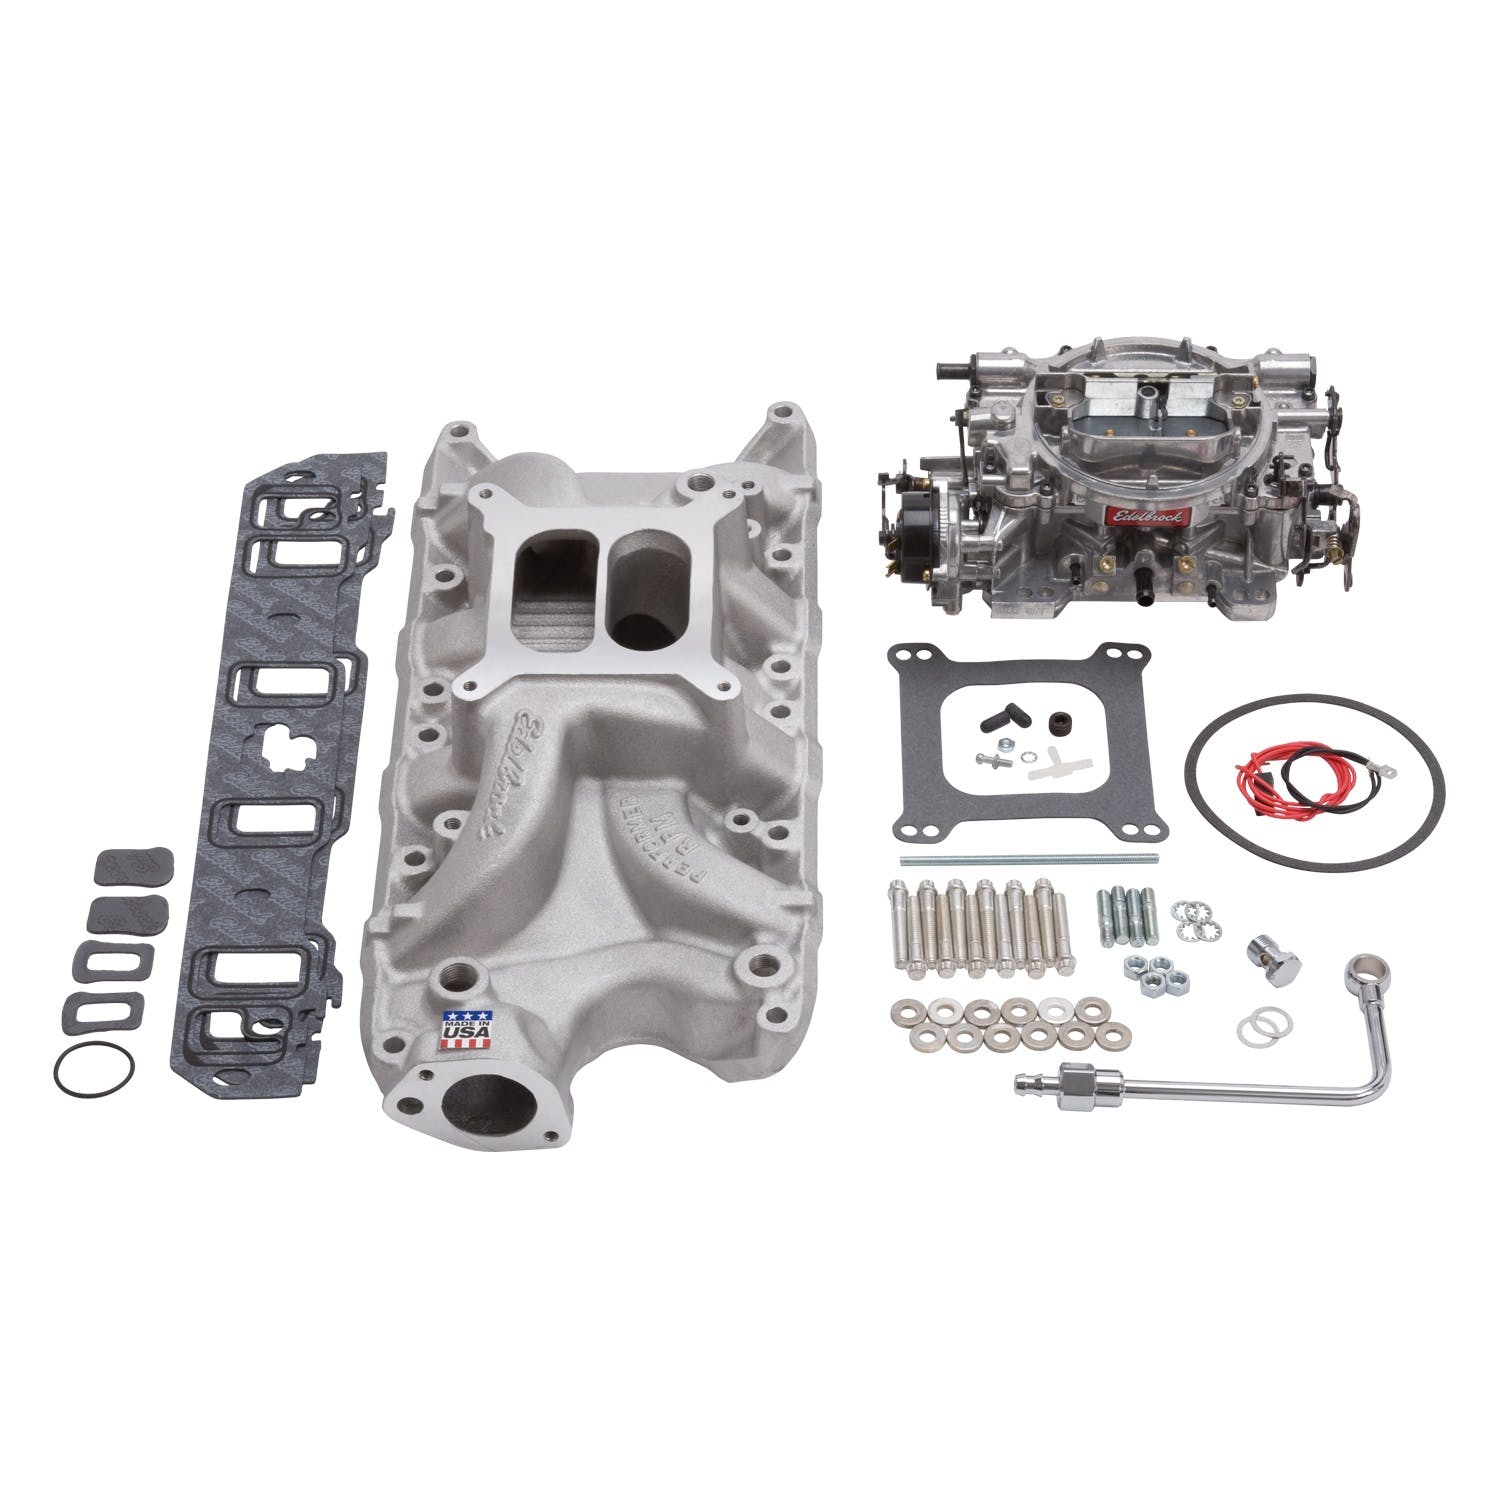 Edelbrock 2032 MANIFOLD and CARB KIT, PERFORMER RPM SBF 289-302 NATURAL FINISH